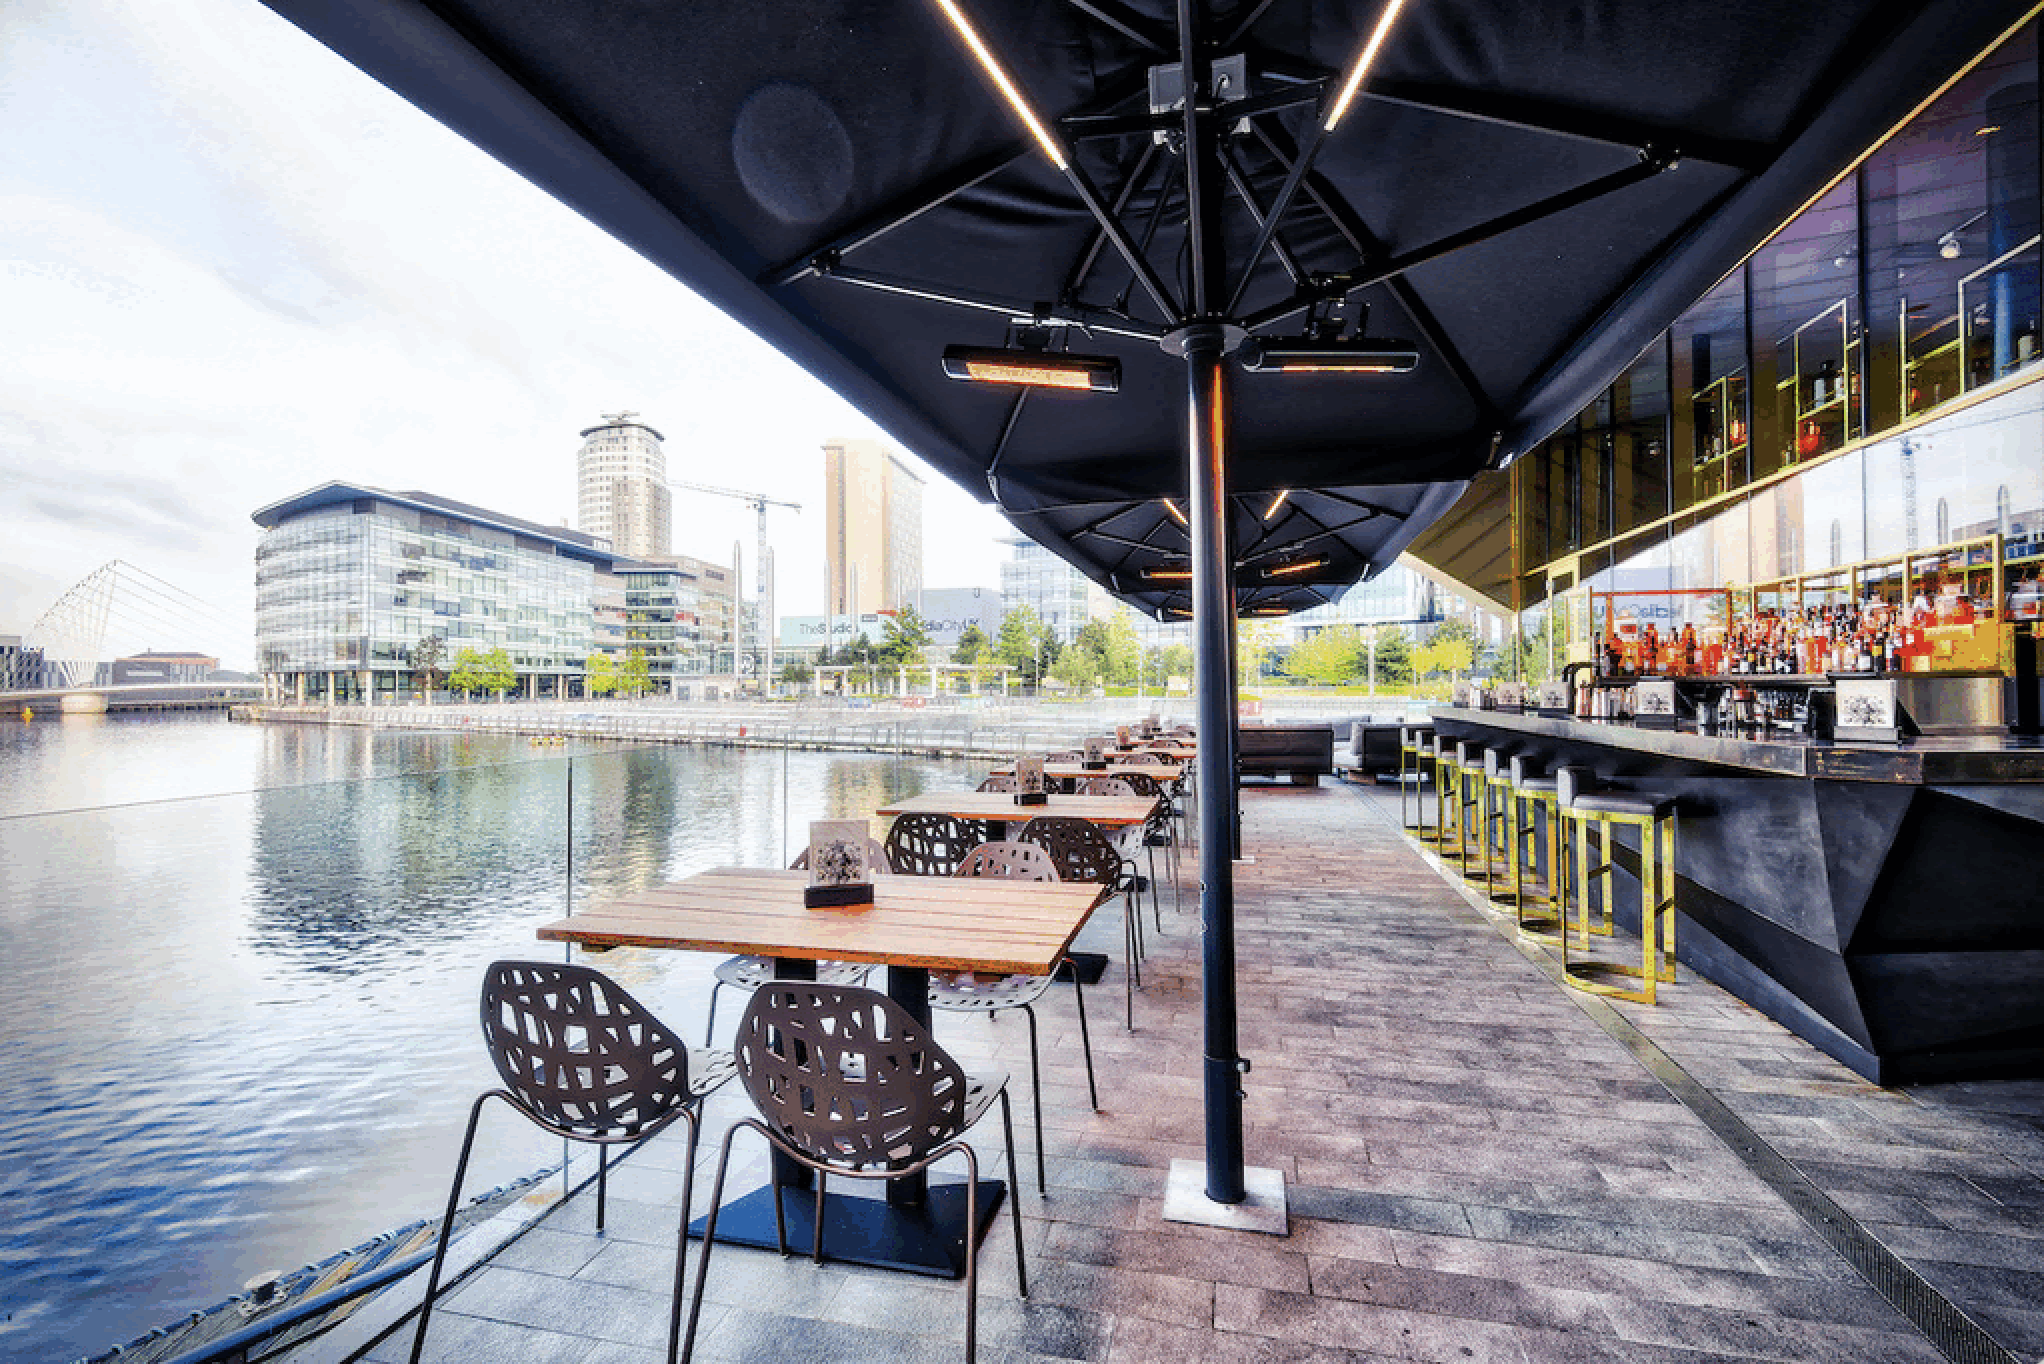 Waterside terrace party comes to The Alchemist at Media City, The Manc